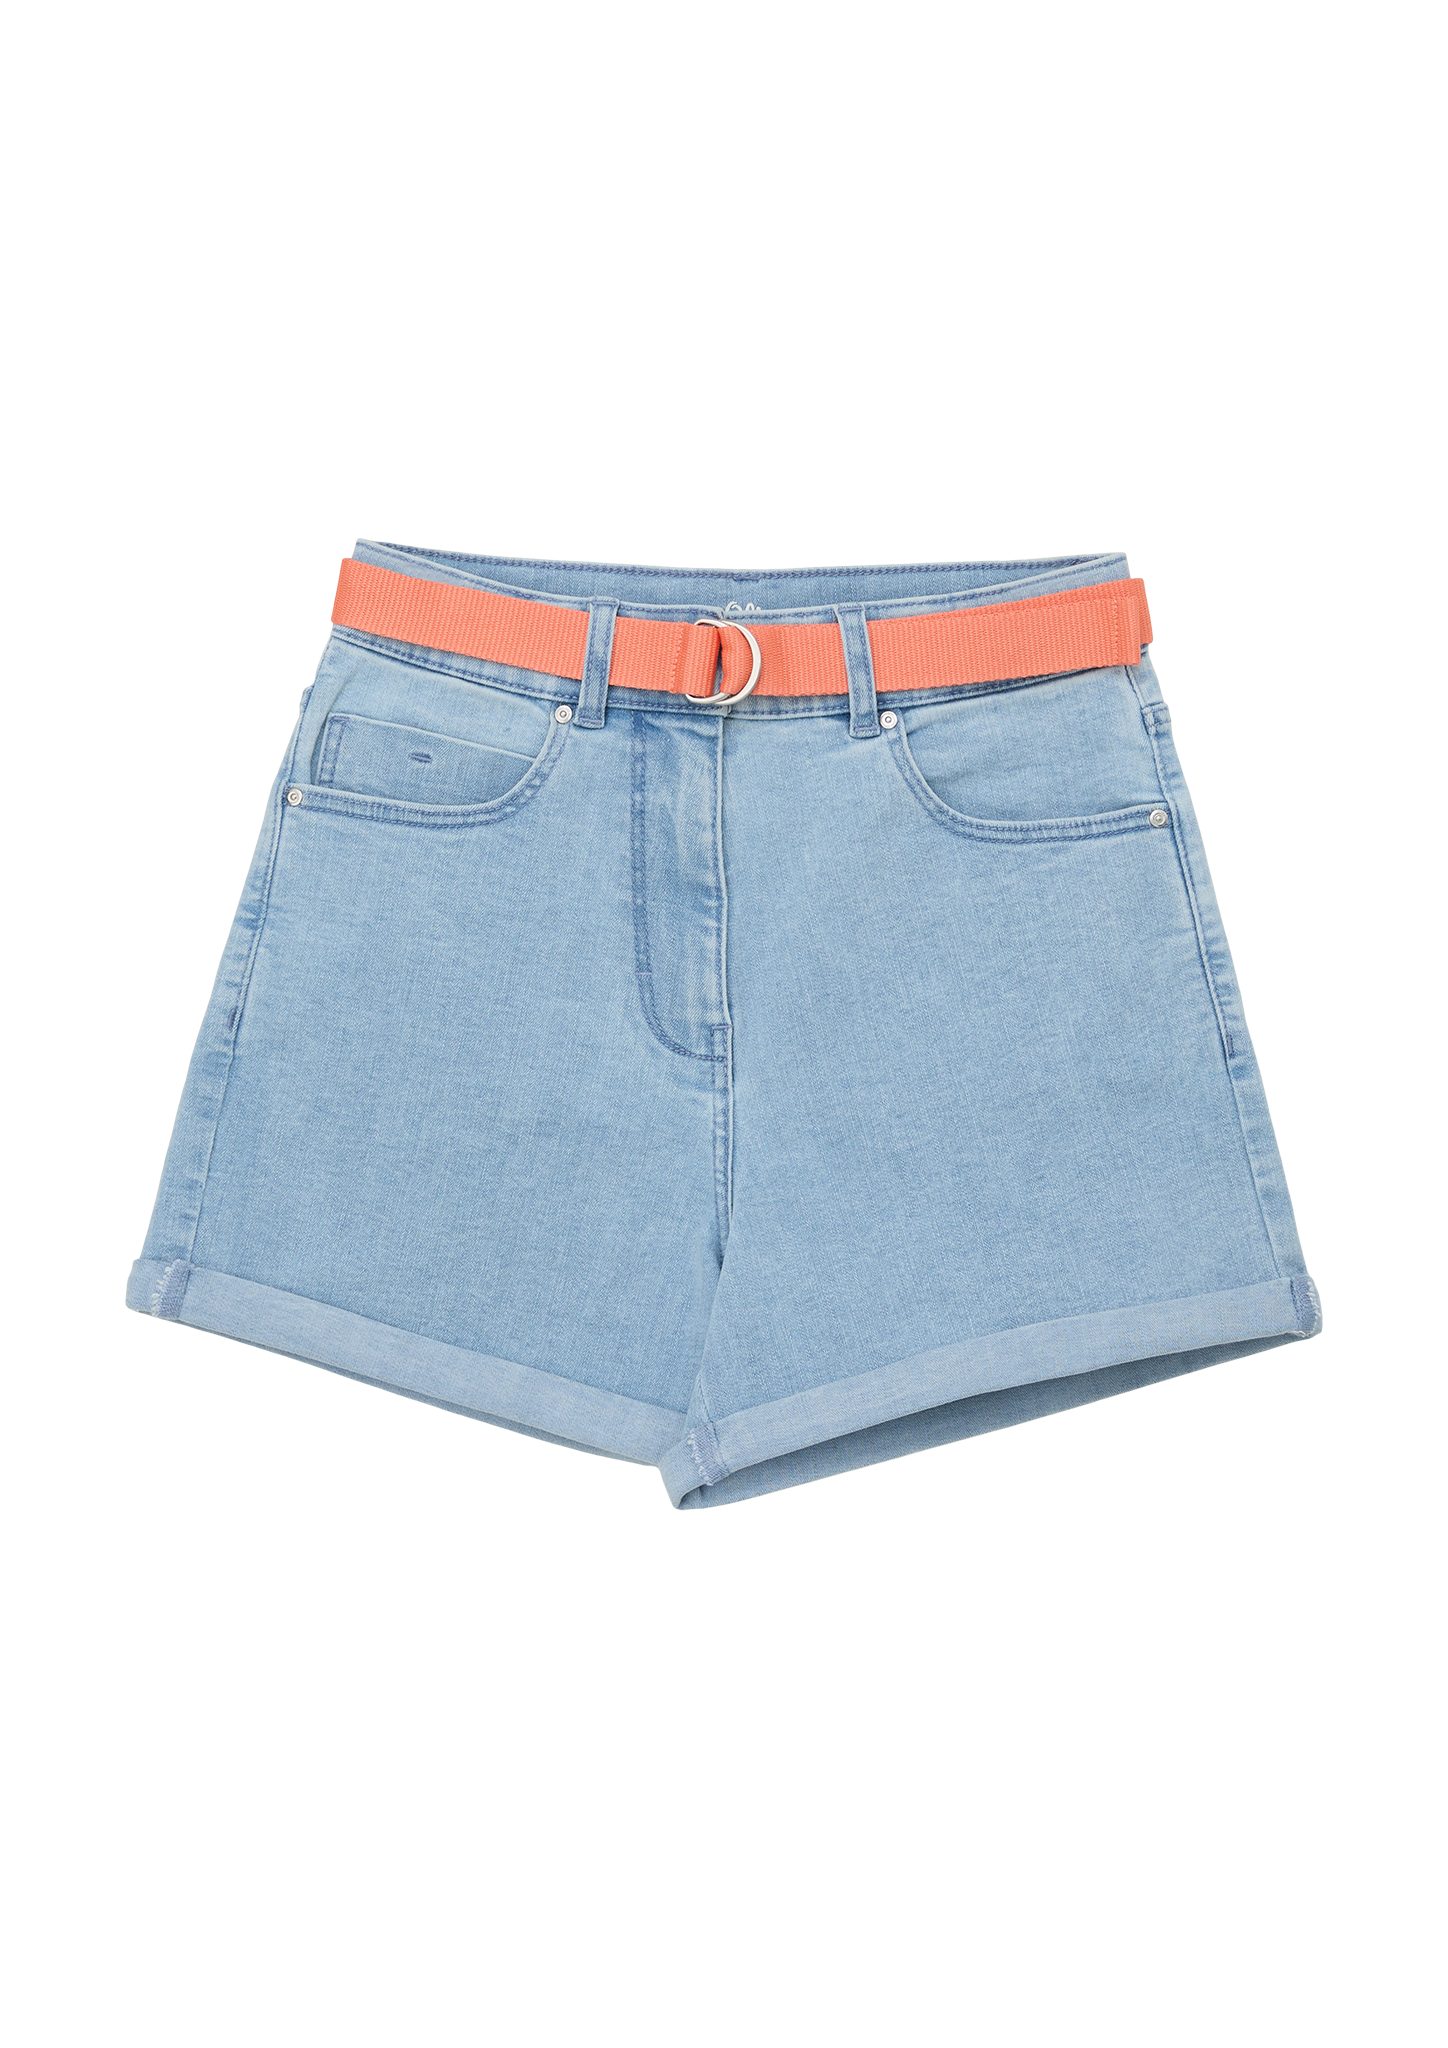 s.Oliver Jeansshorts / Rise Jeans-Shorts Waschung / / High Wide Leg Fit Loose